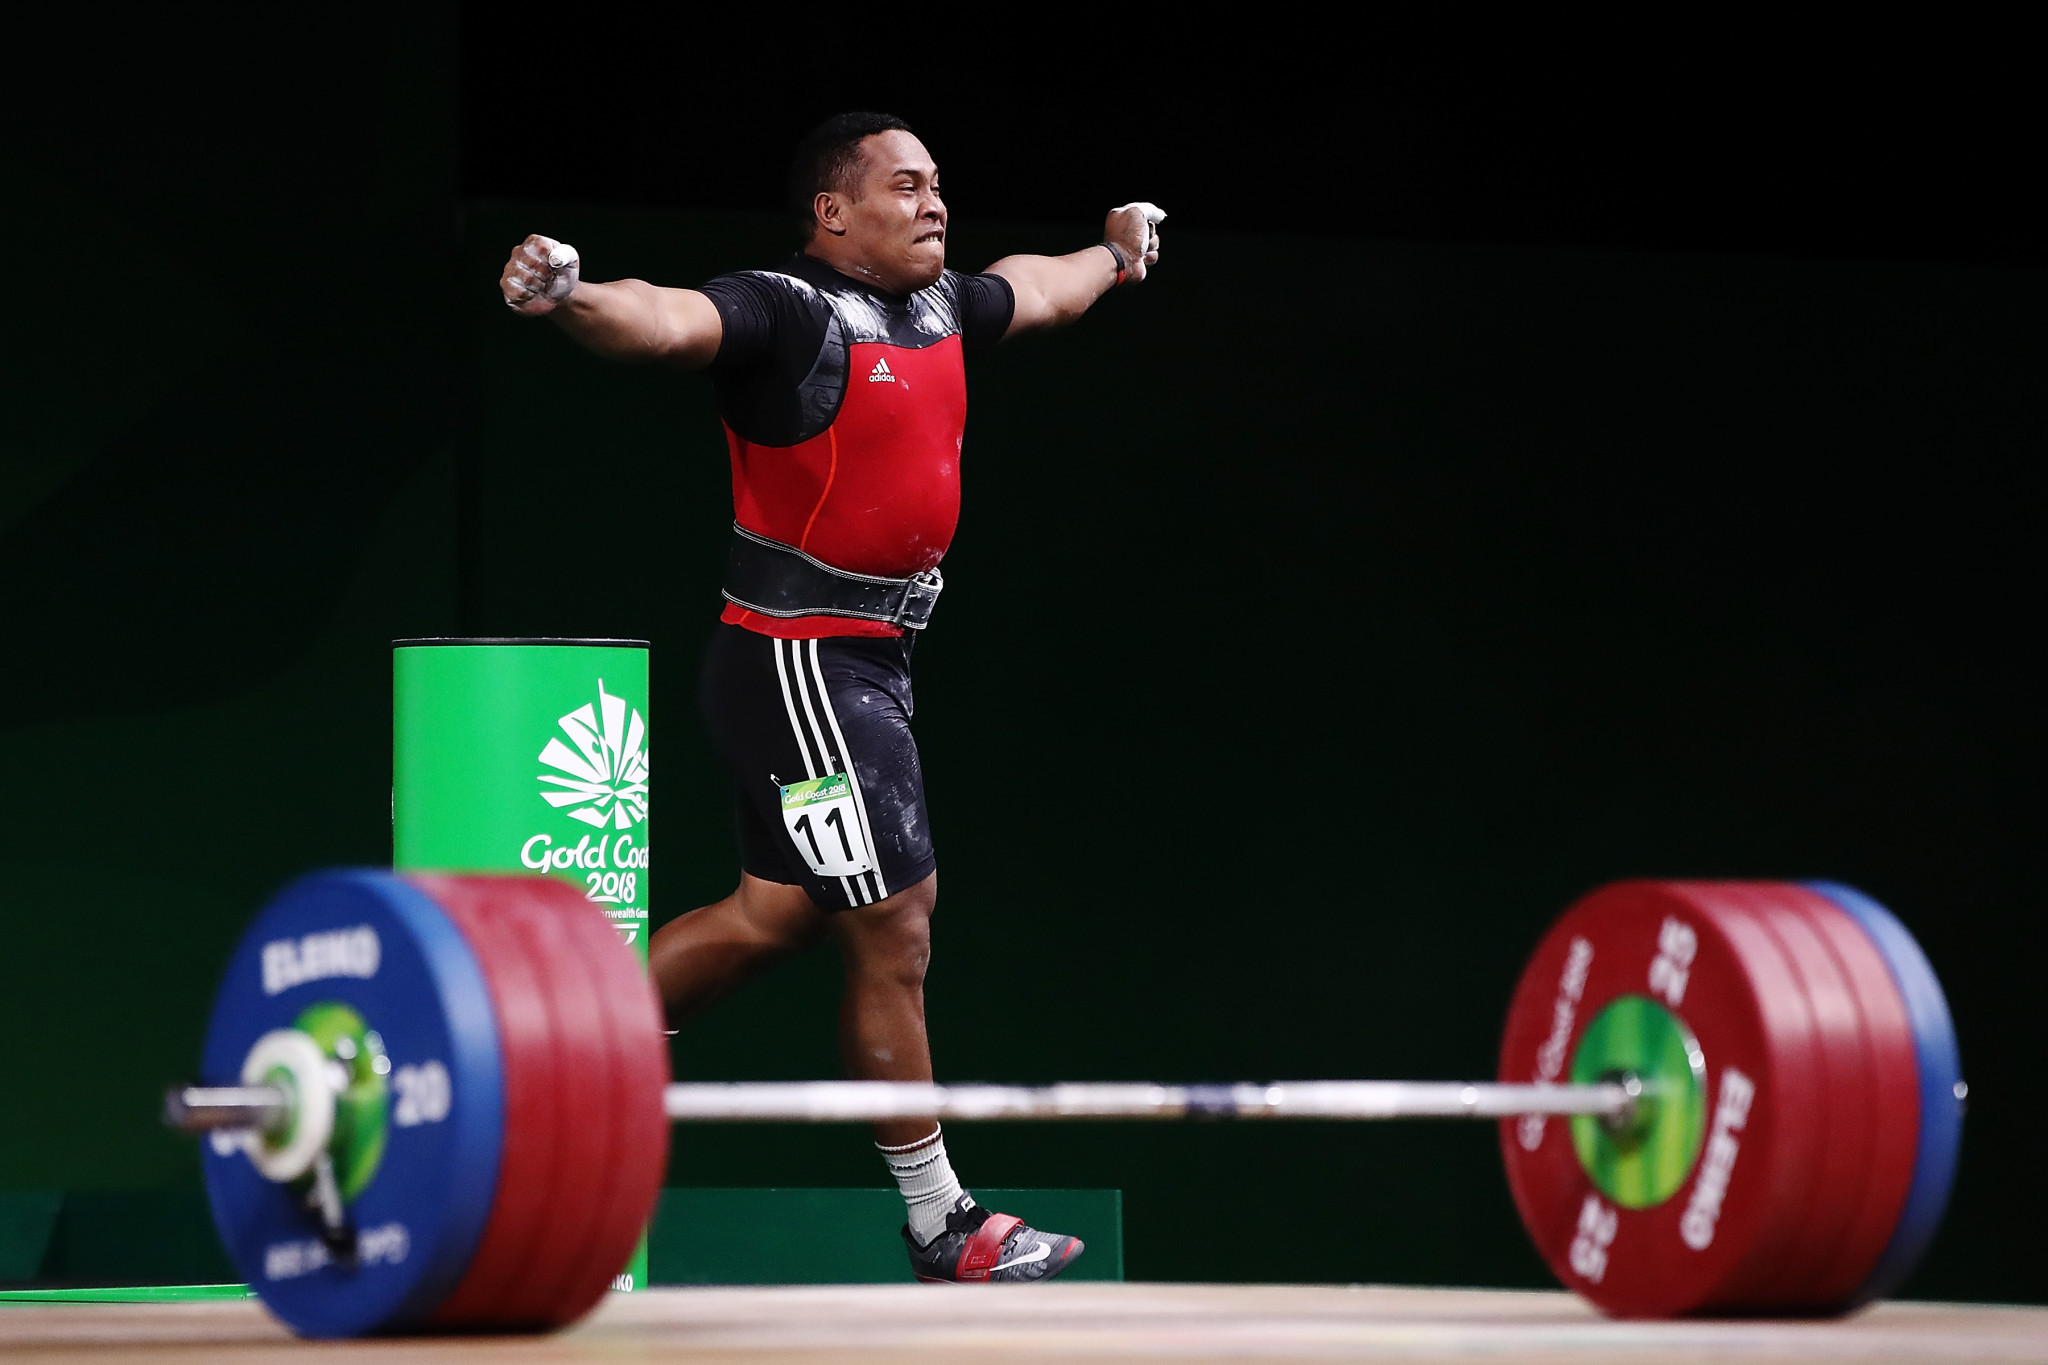 Papua New Guinea’s Steven Kari successfully defended his Commonwealth Games title in the men’s 94 kilograms weightlifting event after breaking the clean and jerk Commonwealth record at Gold Coast 2018 ©Getty Images